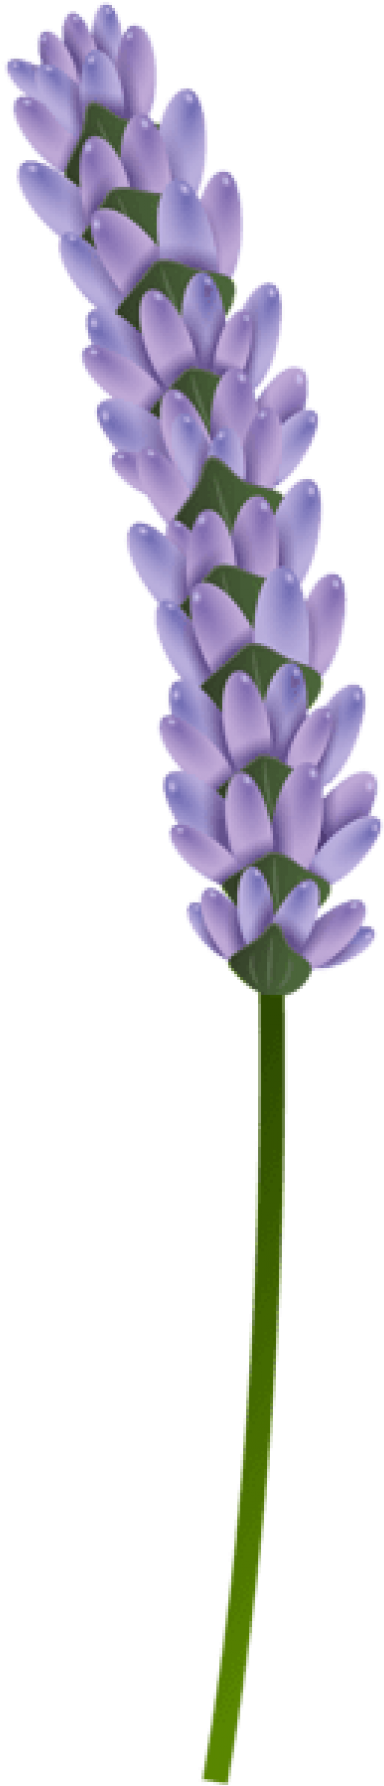 Single Lavender Stem Isolated PNG